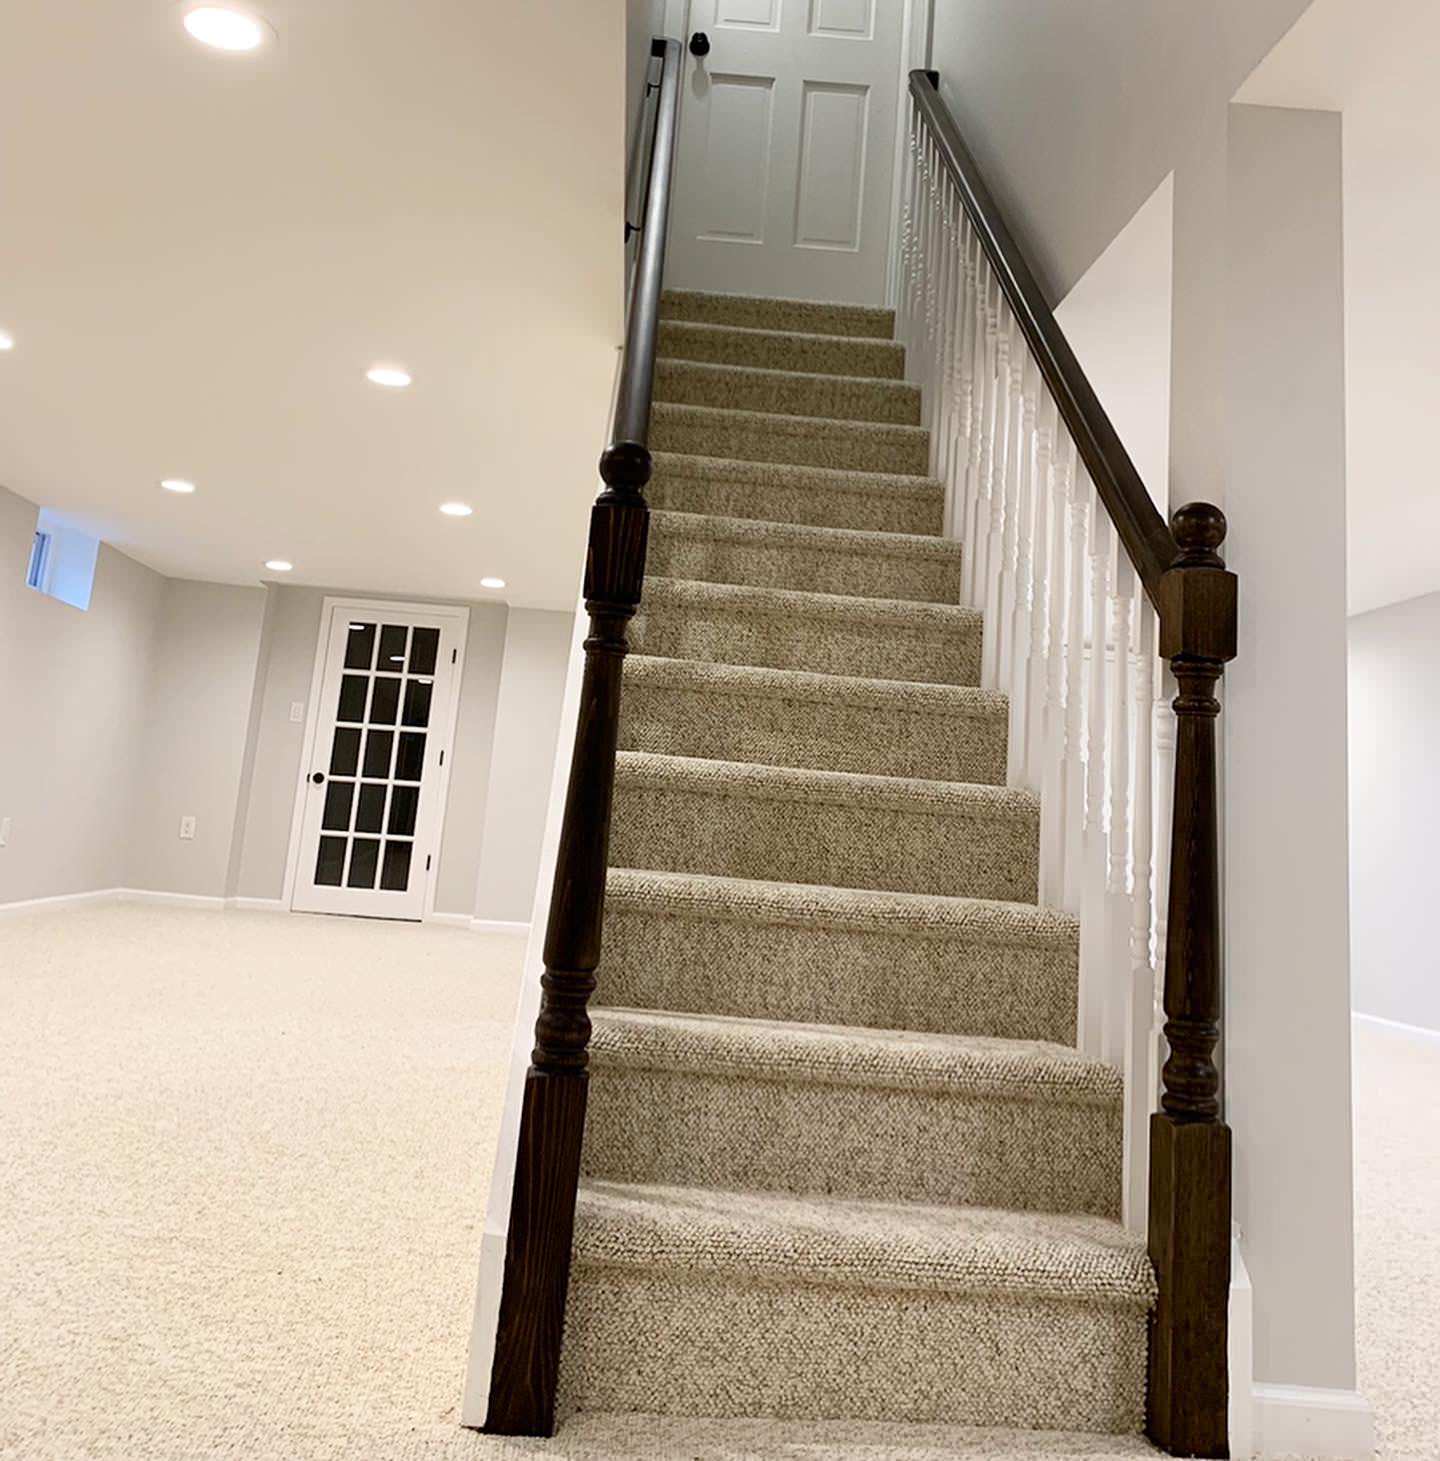 4 Options for Finishing Basement Stairs